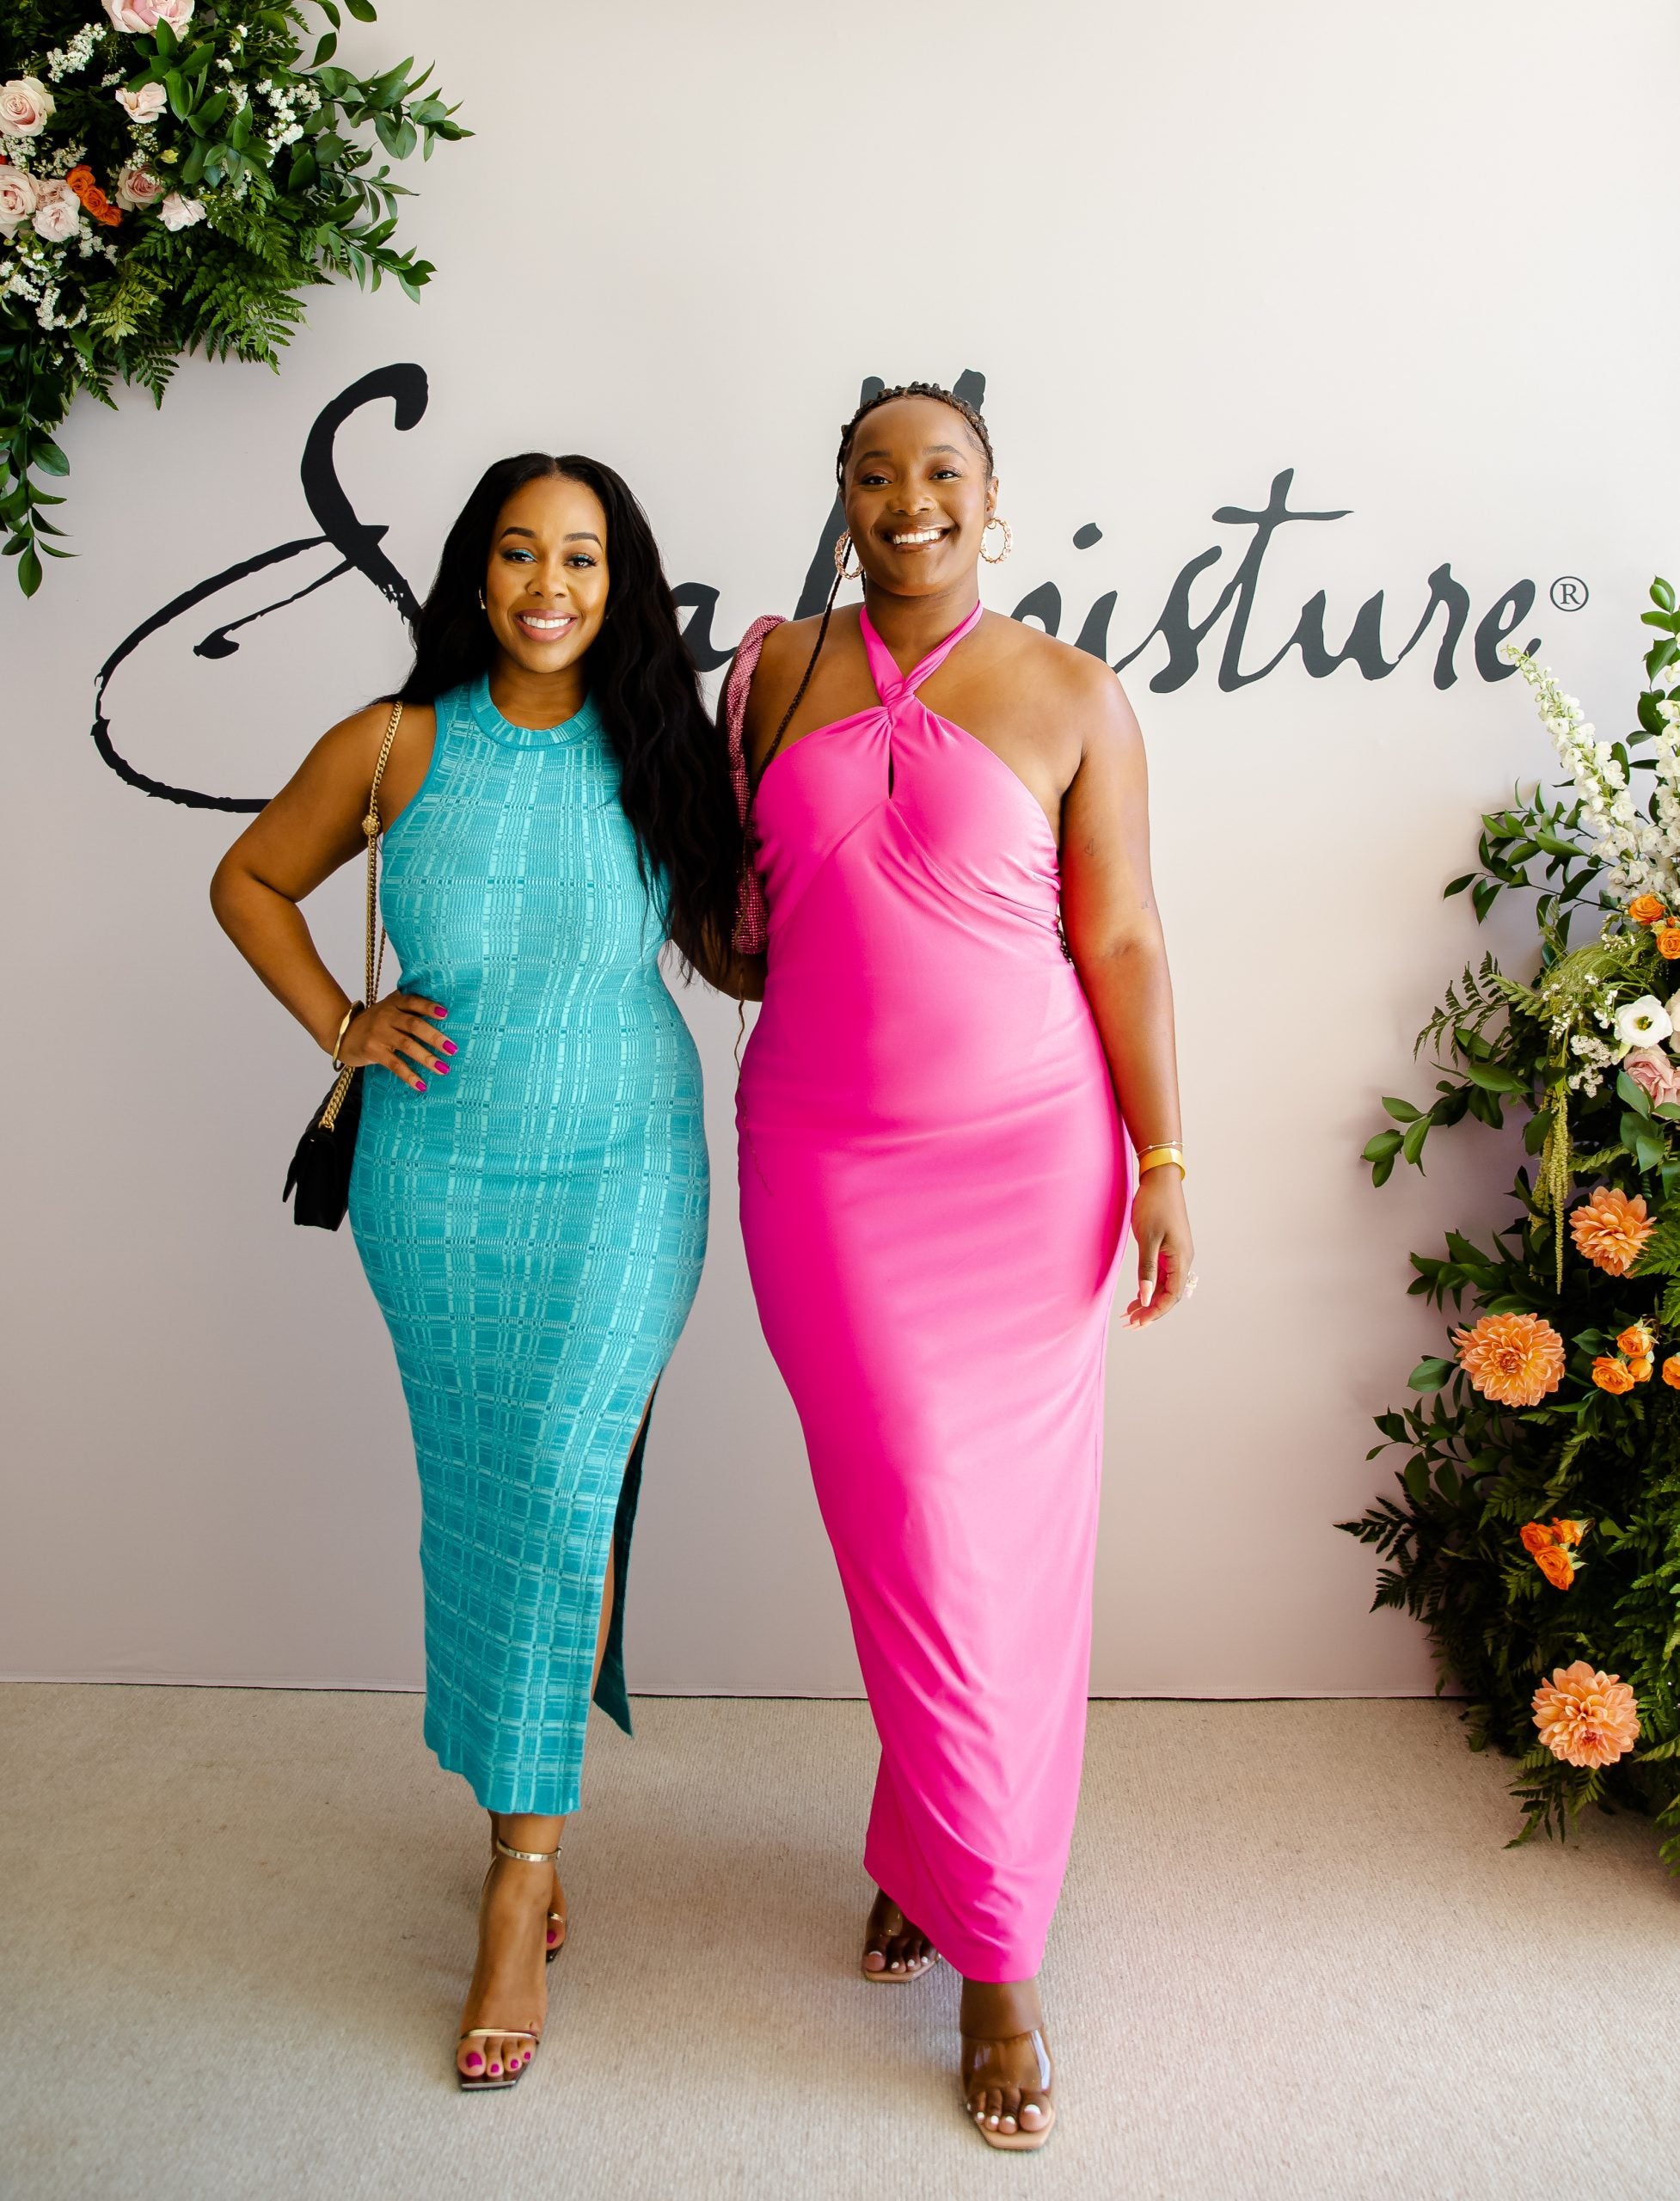 A Summit Of Sisterhood, Sip N’ Slay Takes Over LA With An All-Star Lineup